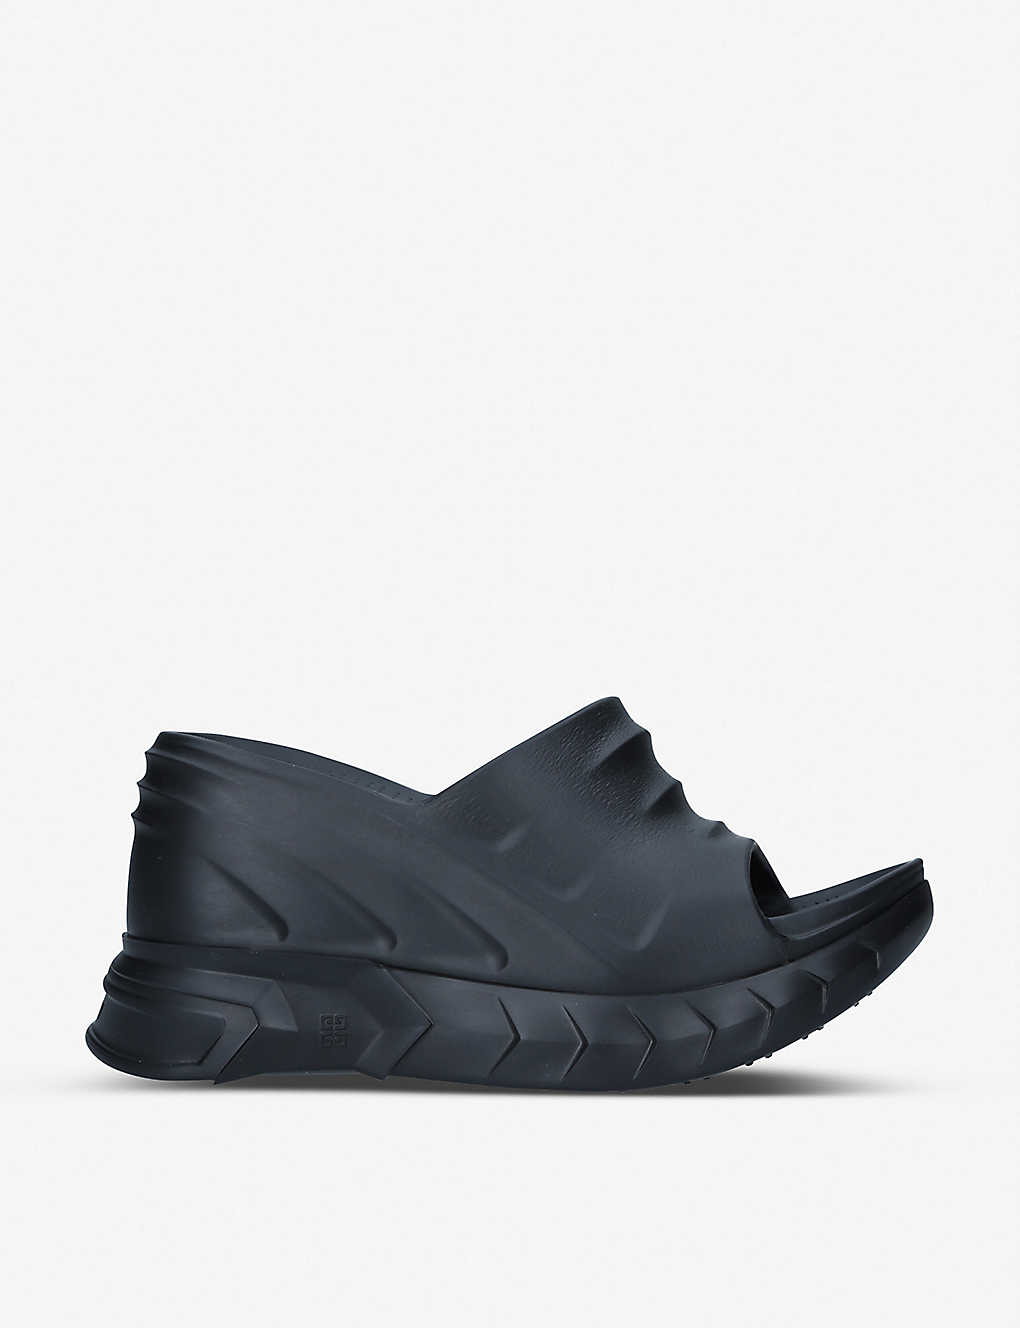 Givenchy Marshmallow Rubber Wedge Sandals In Black